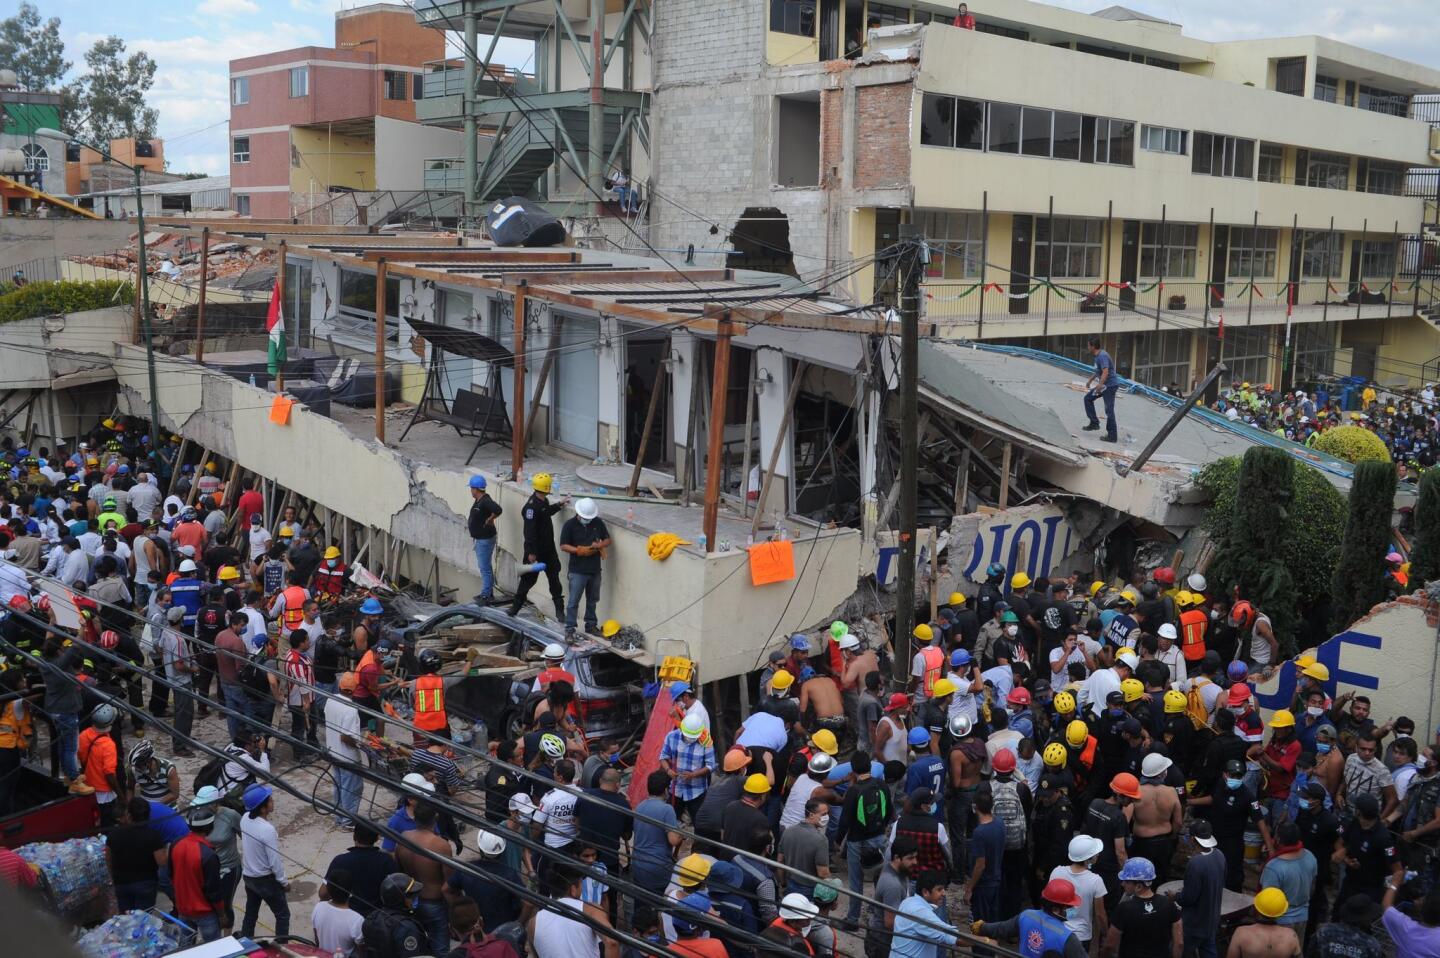 Rescuers work to free those trapped in collapsed school in Mexico City